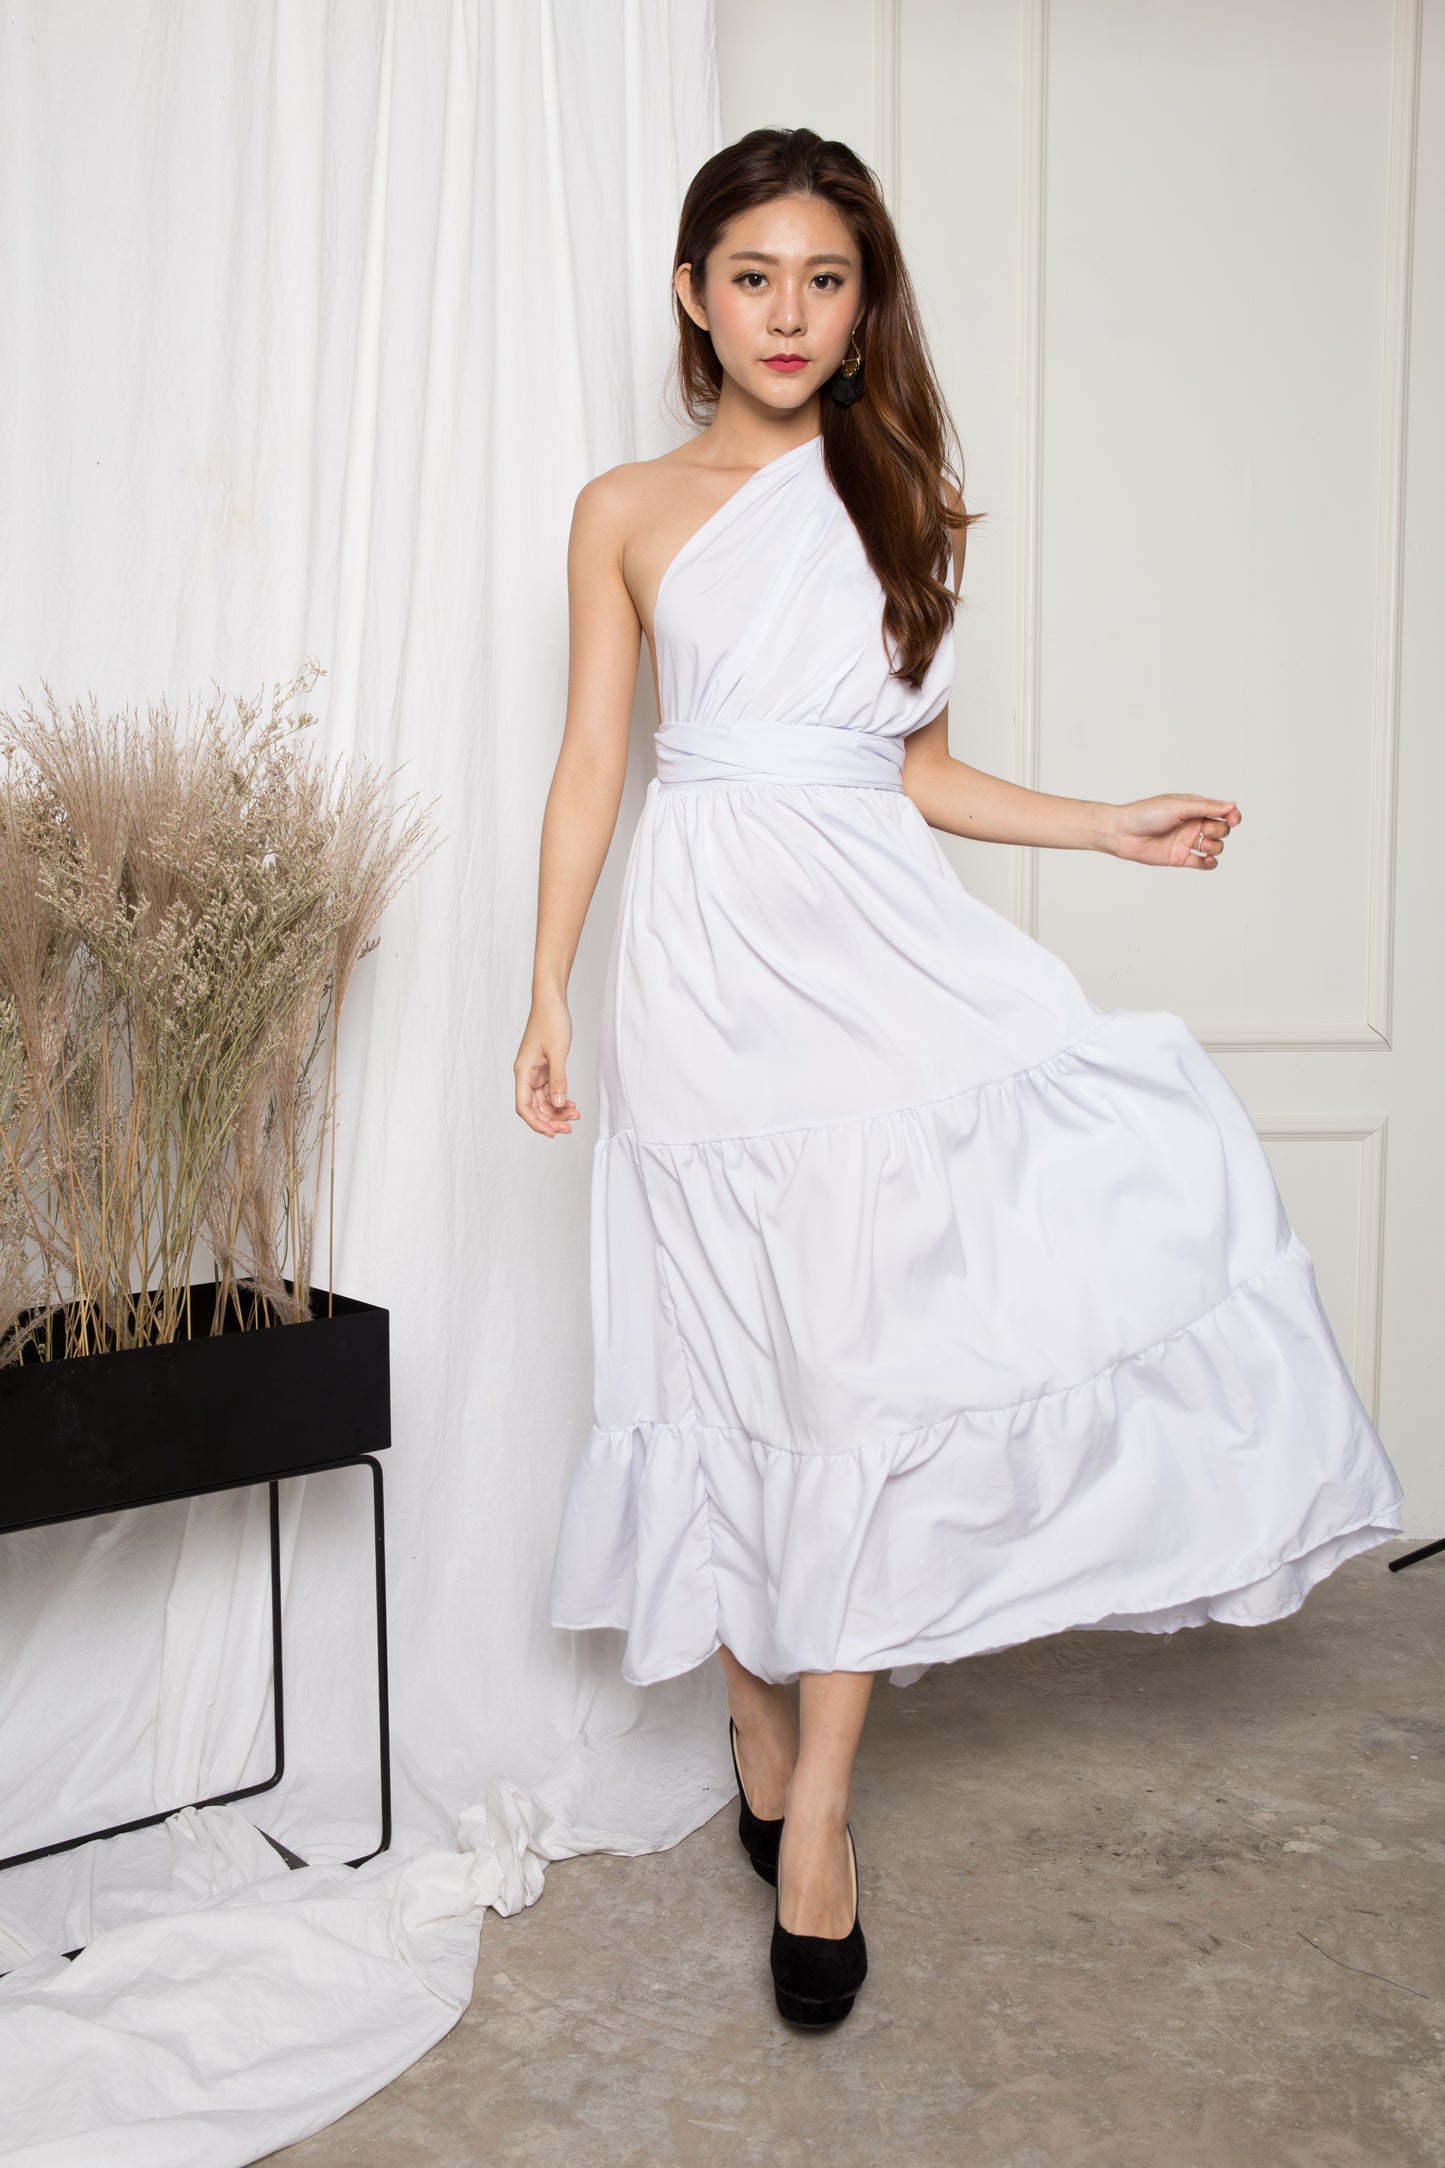 LUXE - Paris Lover Do it Yourself Maxi Dress in White